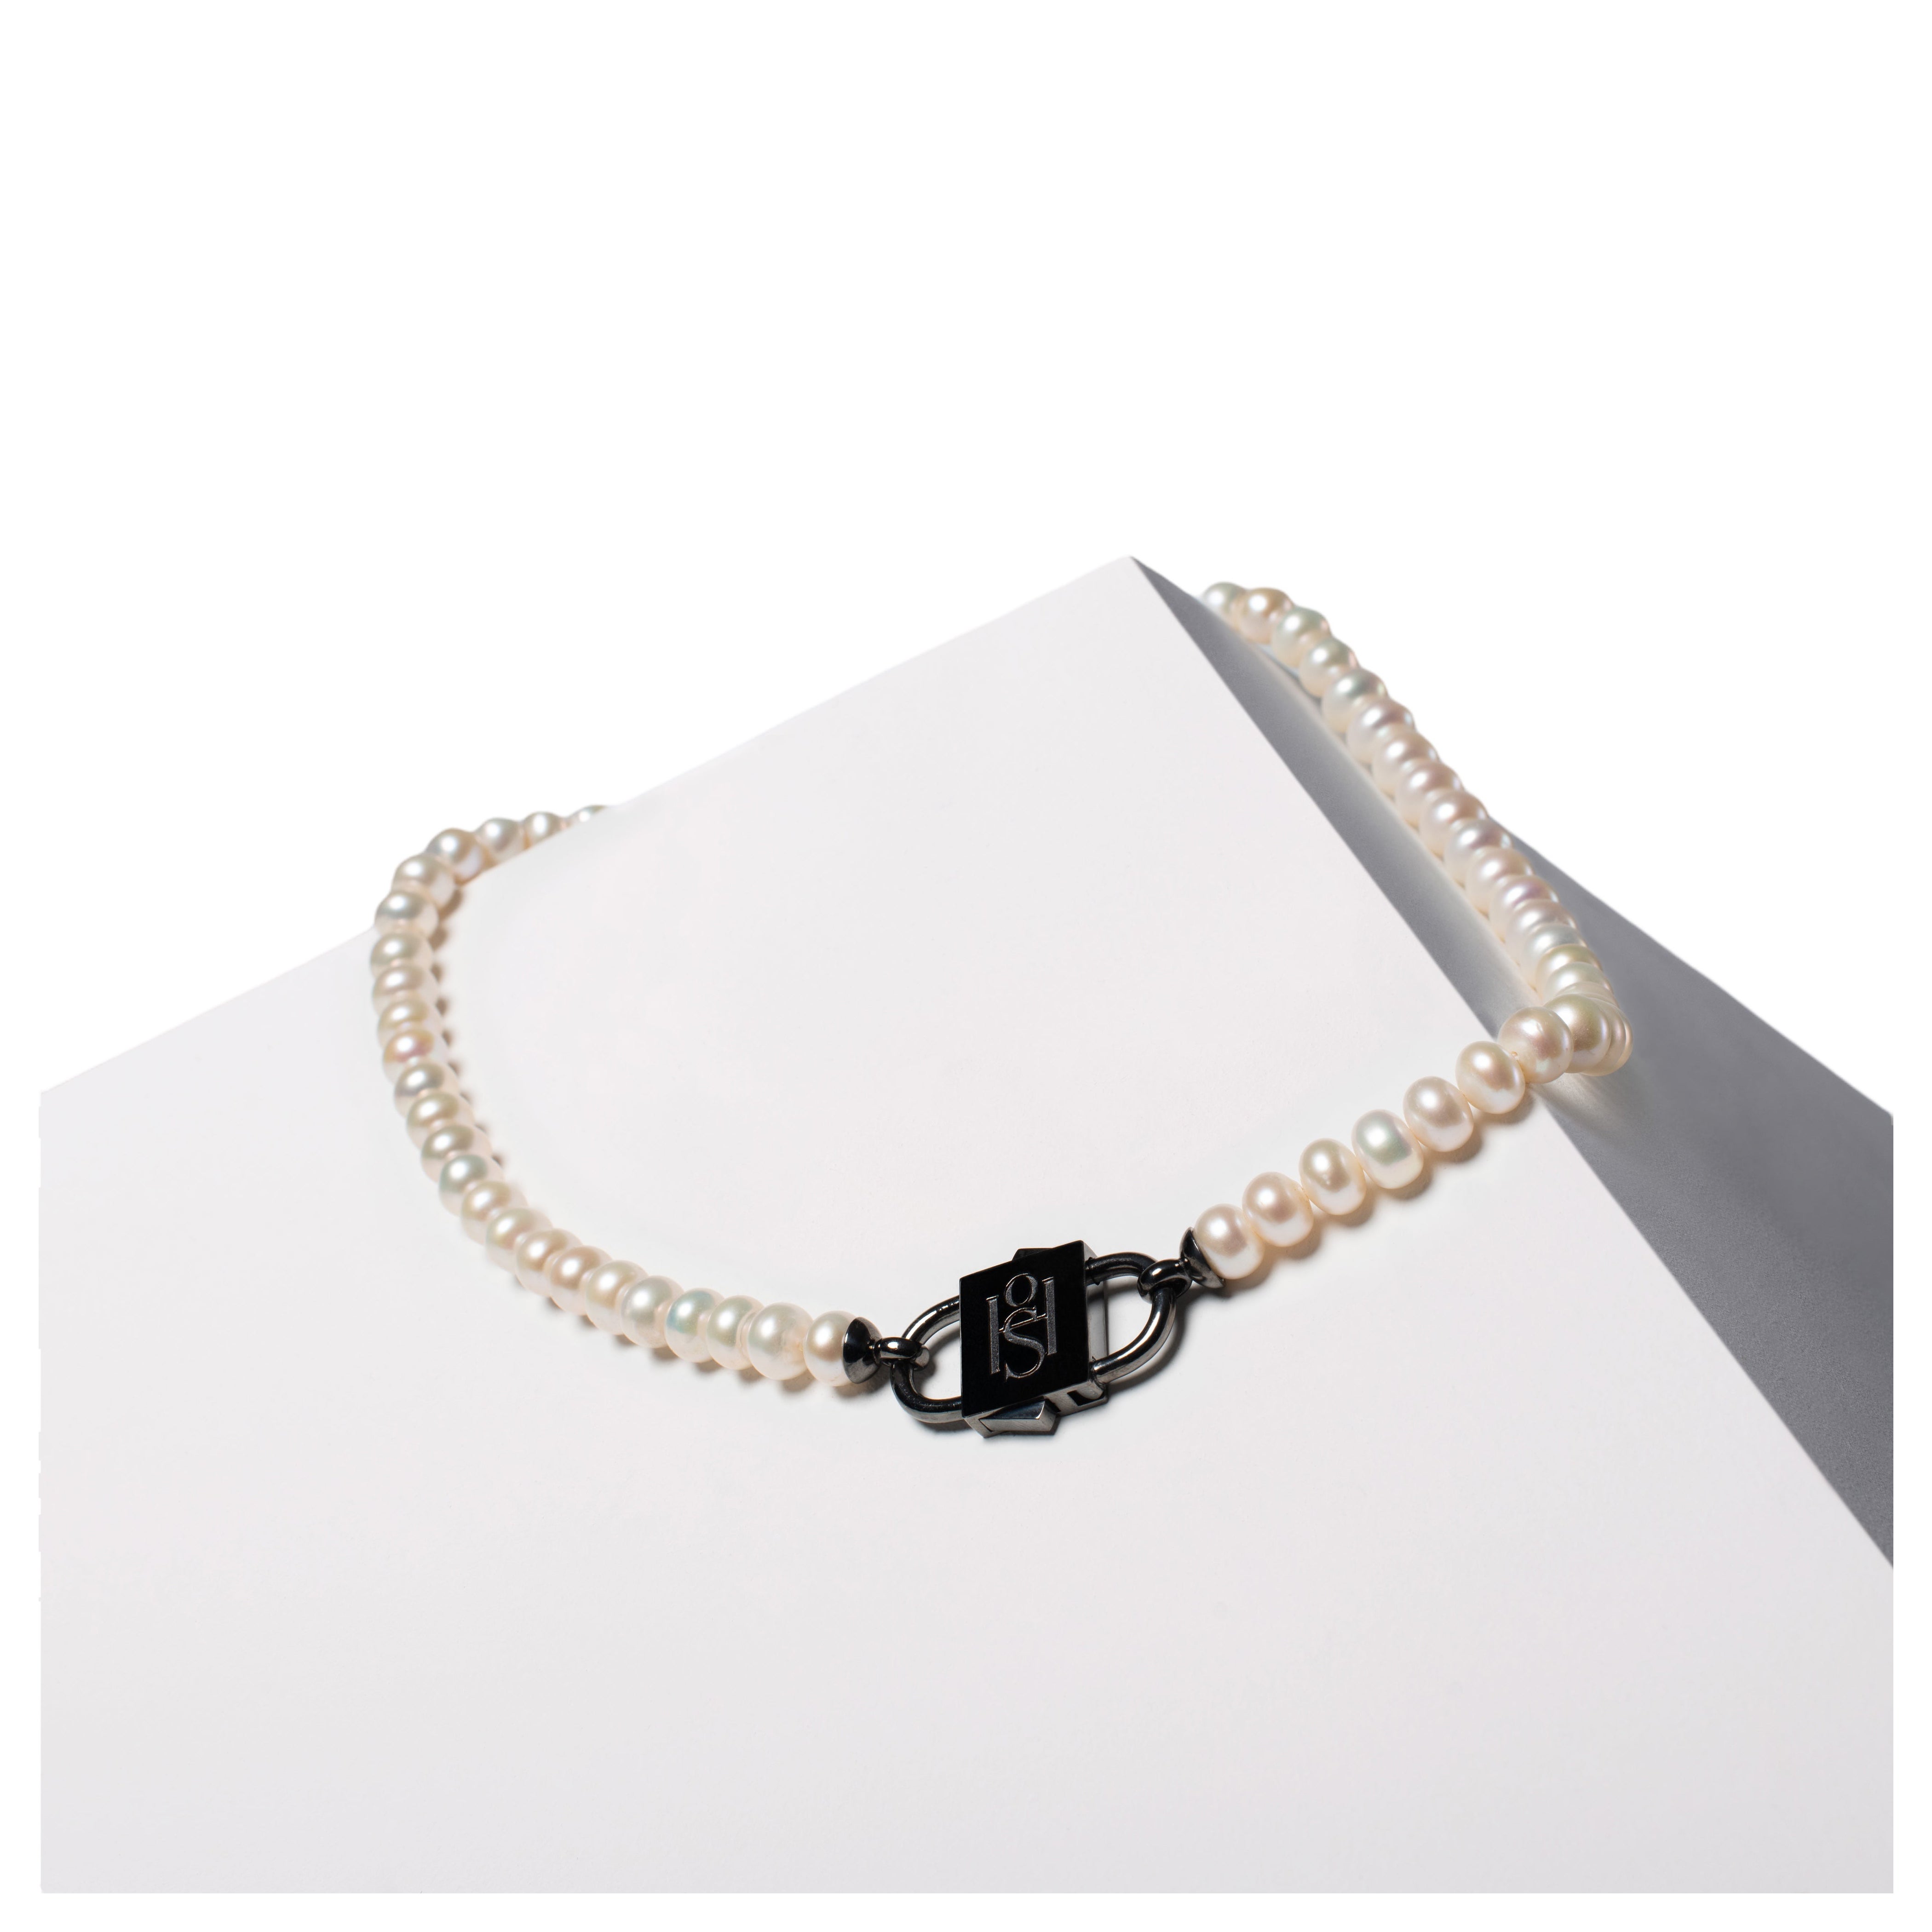 House of Sol Pearl Necklace with 24K Rhodium Filled HoS Lock For Sale